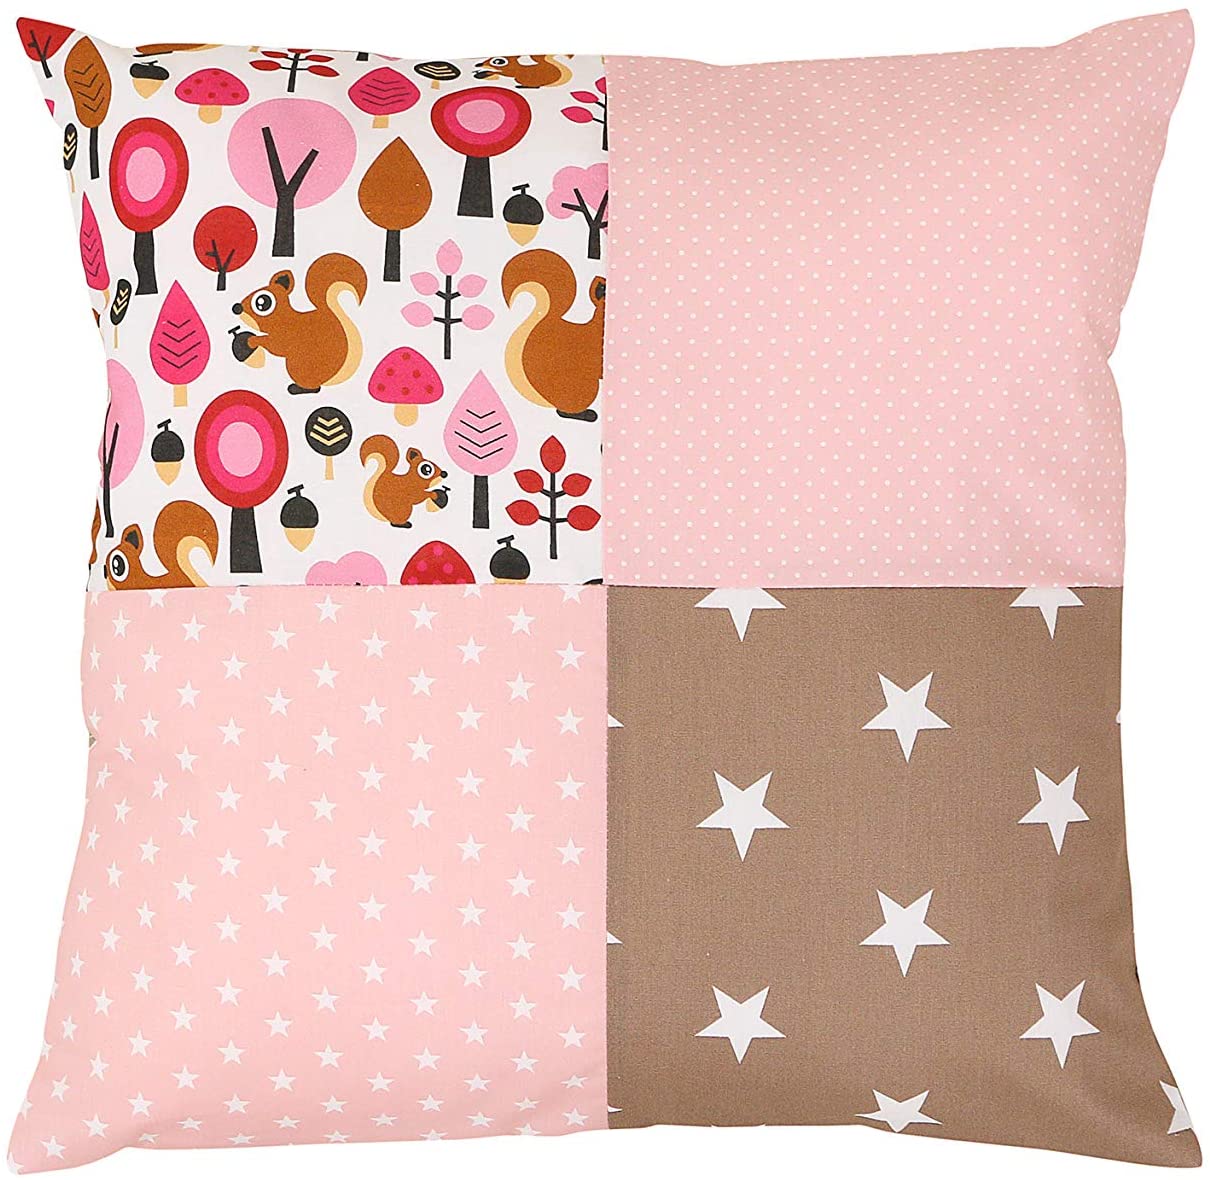 Ullenboom ® Patchwork Cushion Cover 40 X 40 Cm Cushion Cover – In 10 Colour